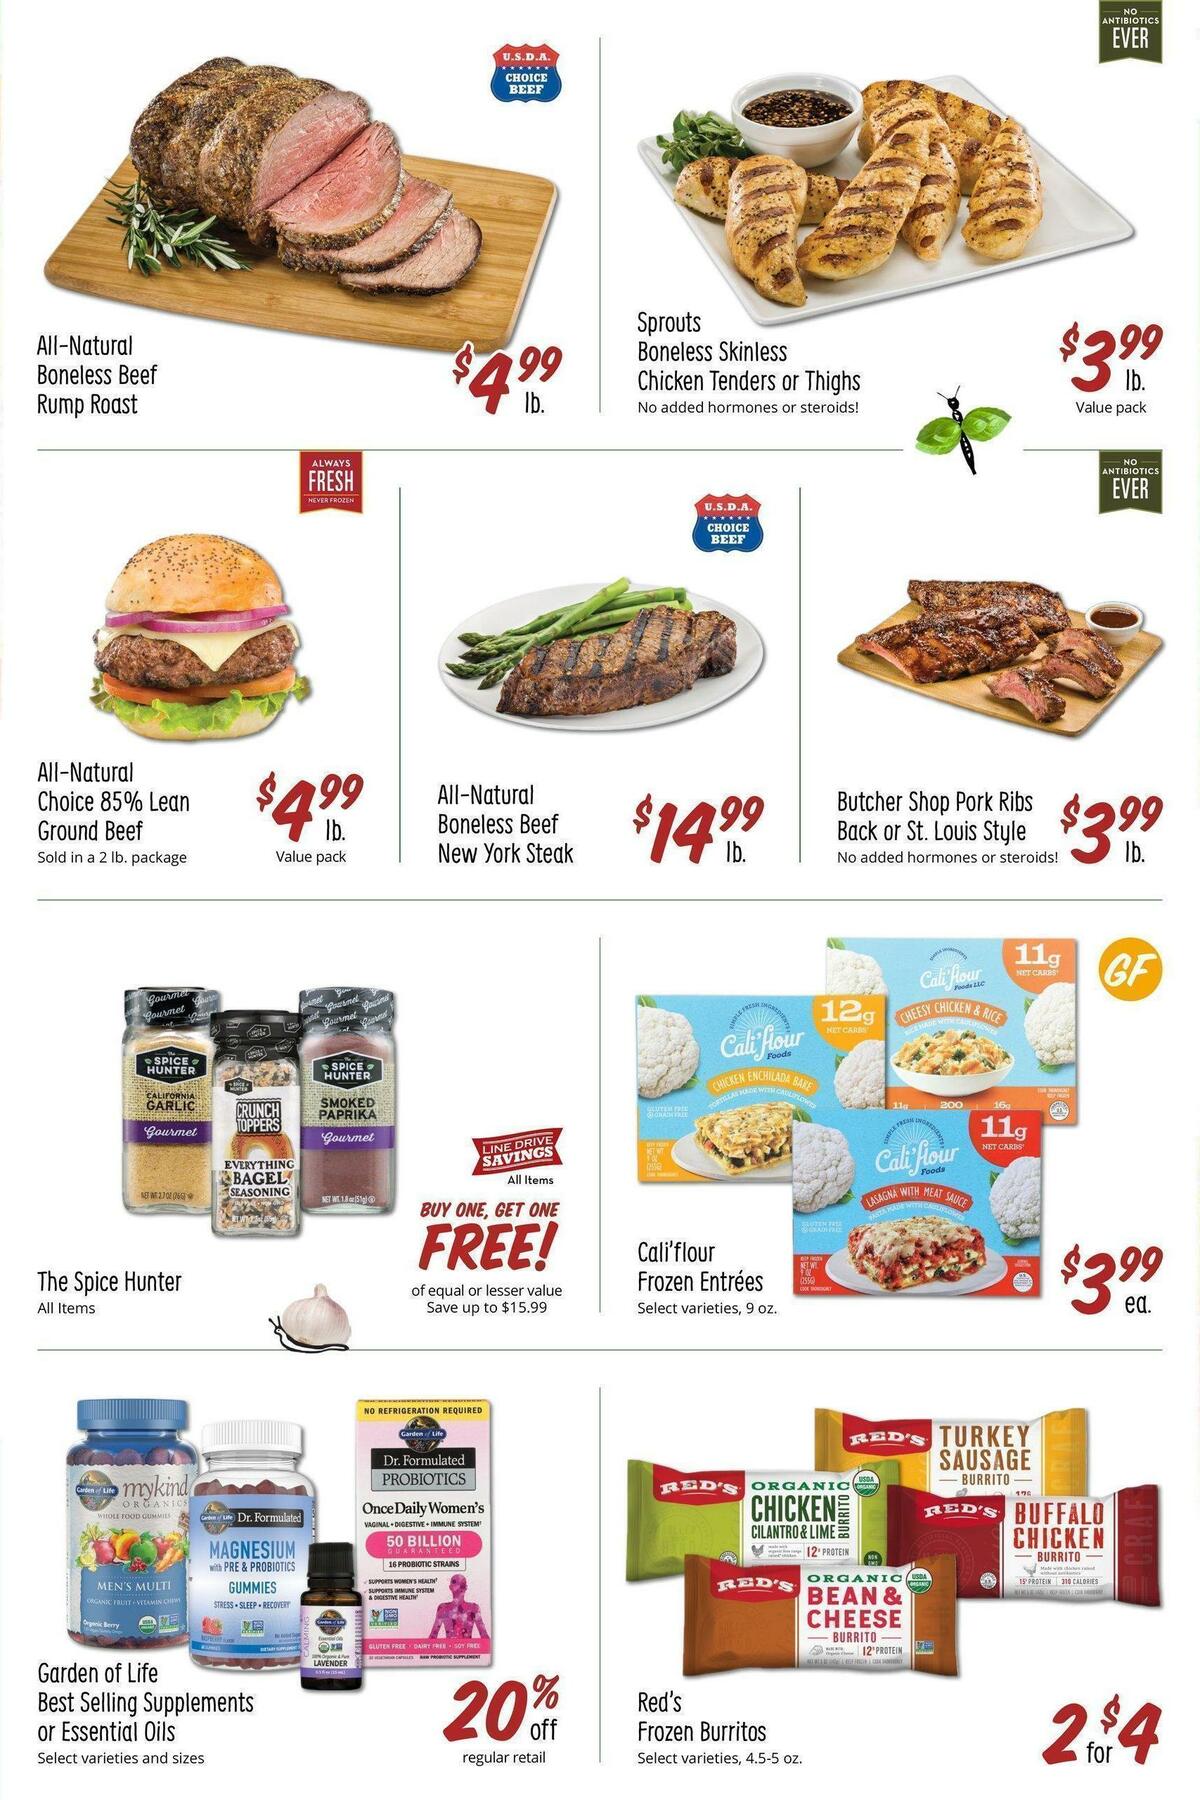 Sprouts Farmers Market Weekly Ad from March 22